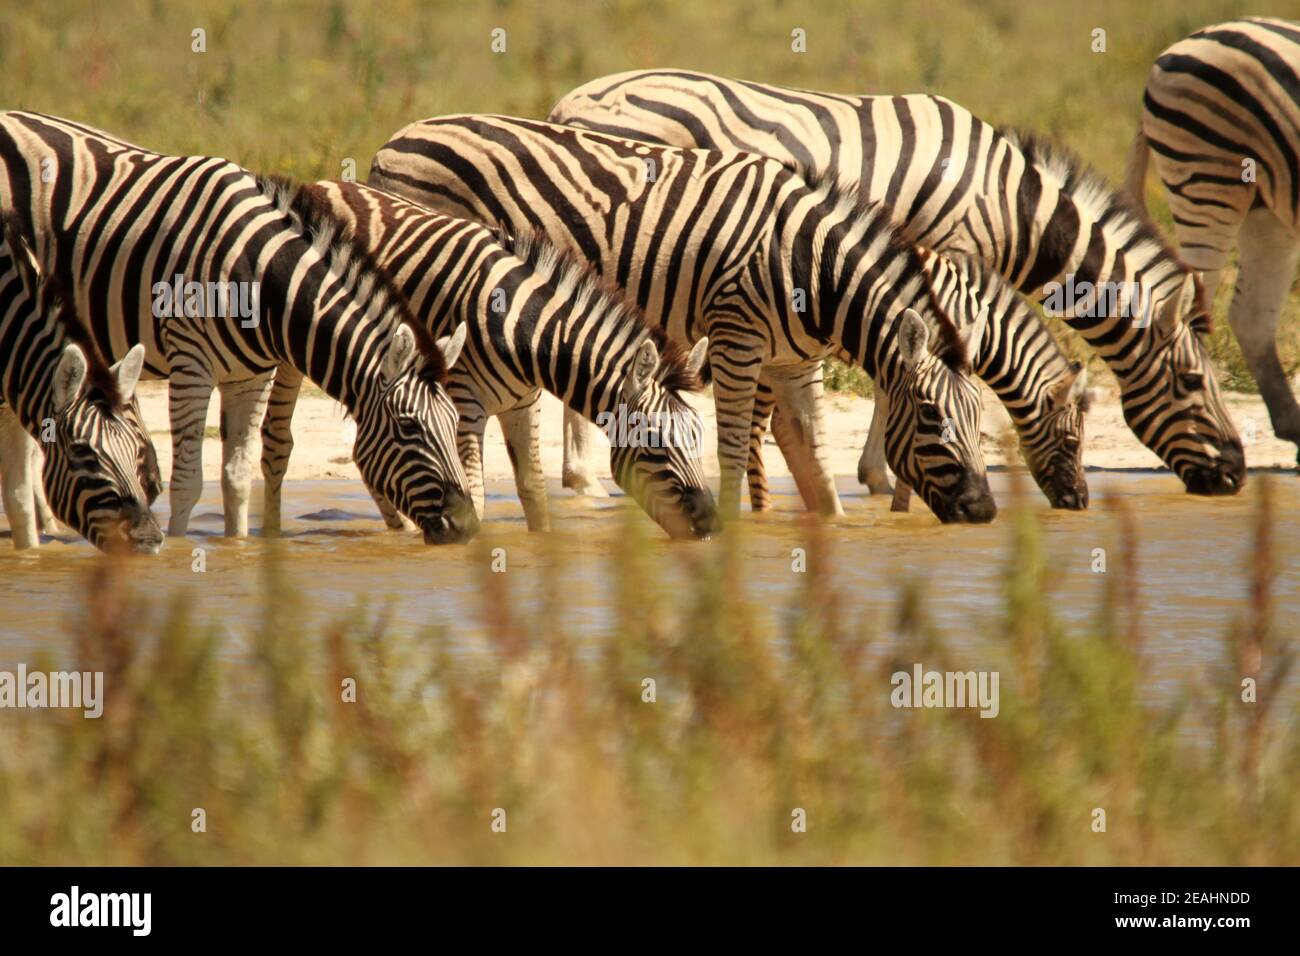 A herd of zebra drinking from a watering hole in Namibia Stock Photo